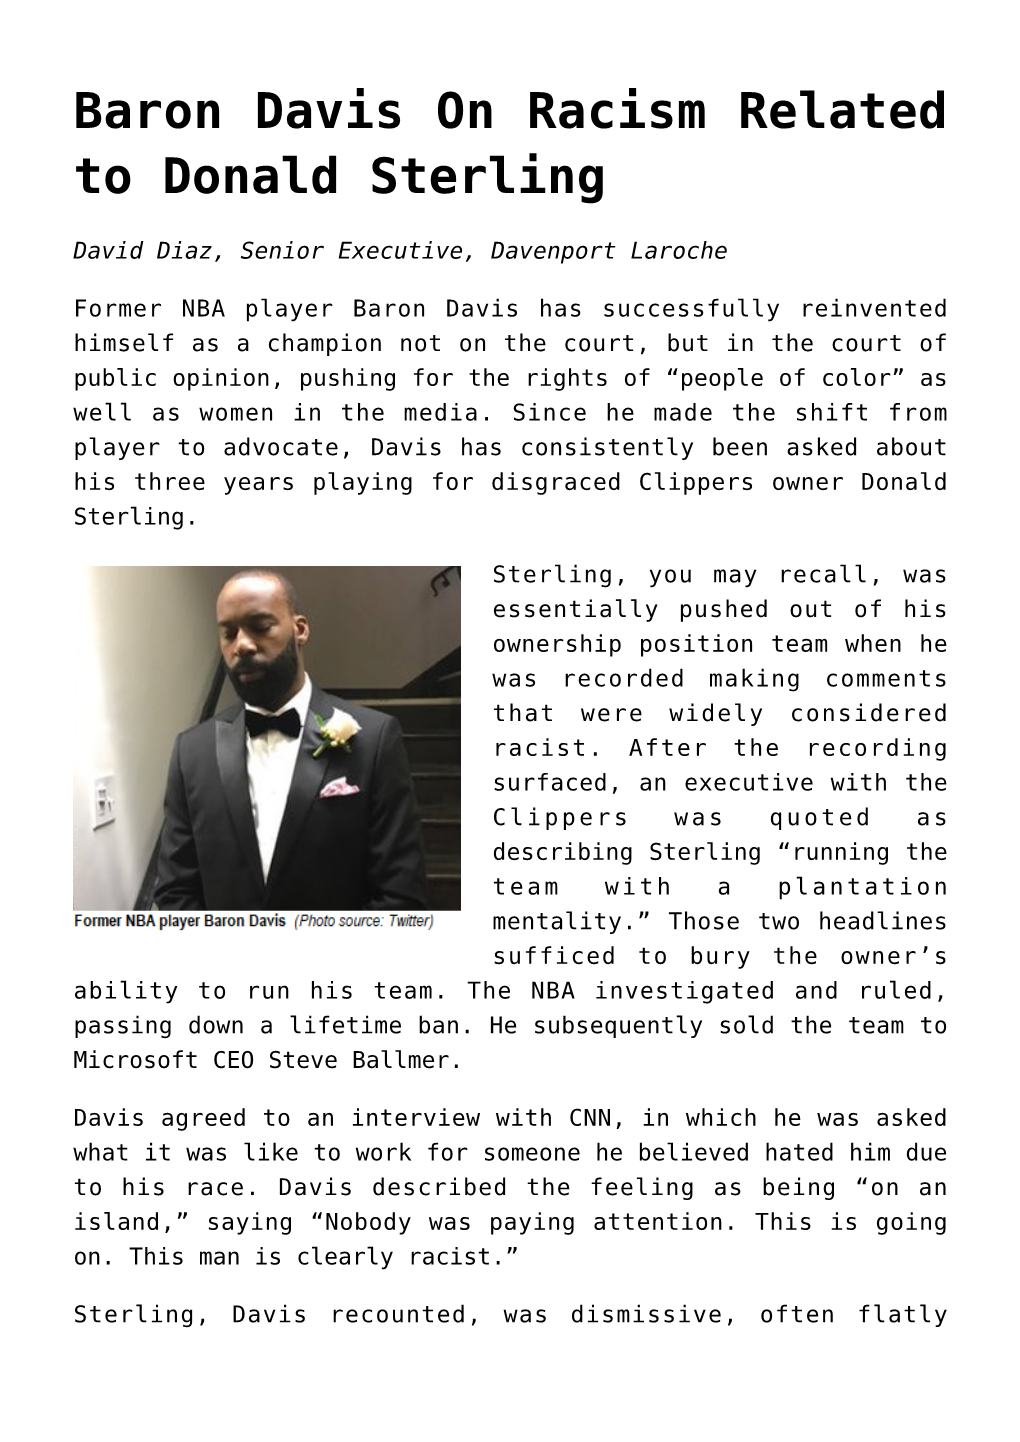 Baron Davis on Racism Related to Donald Sterling